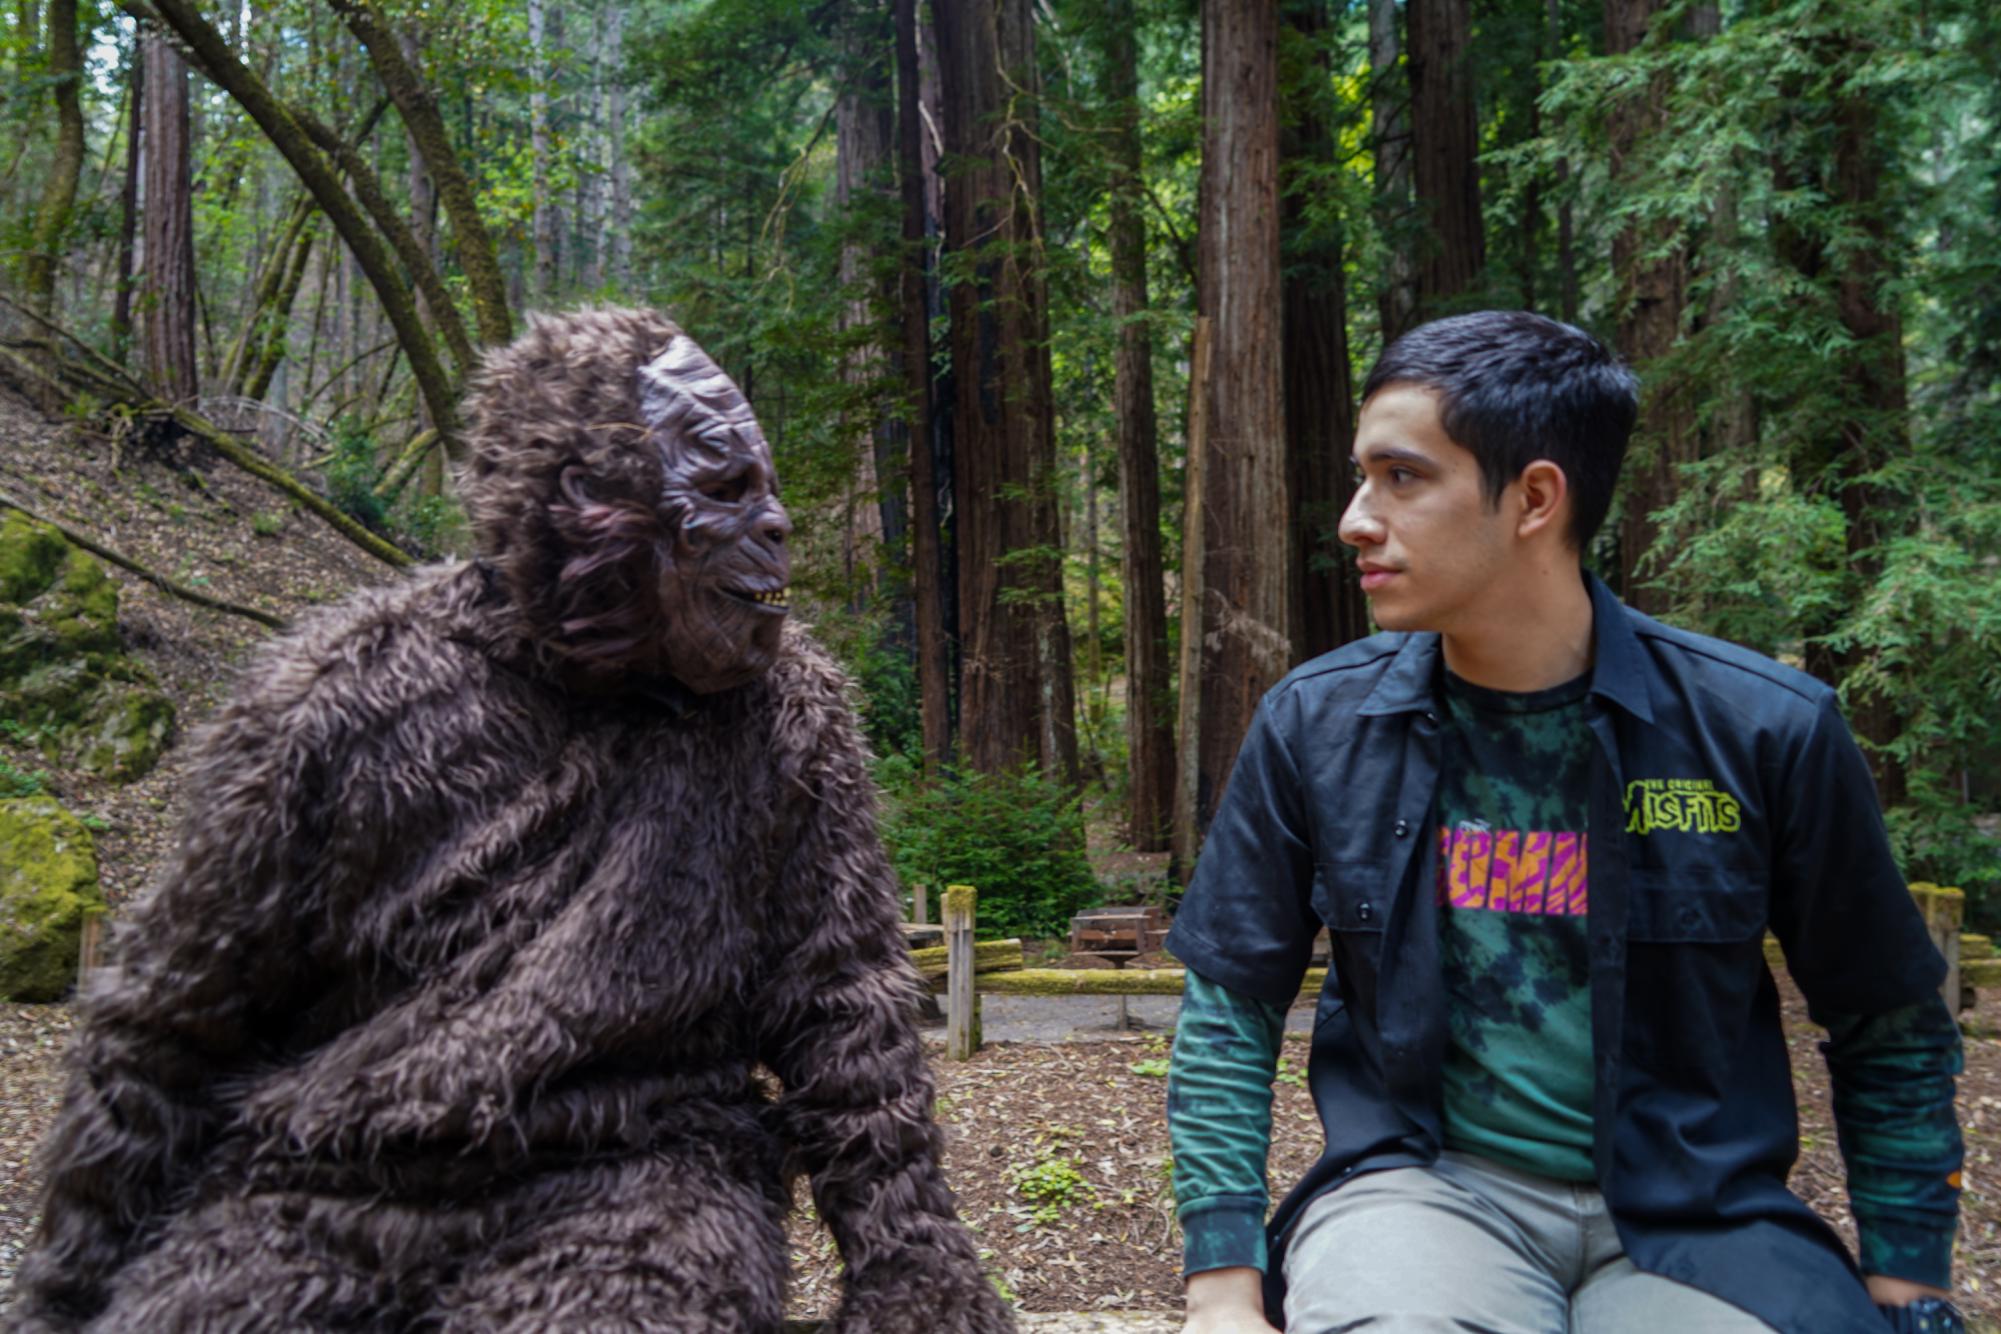 The Oak Leaf reporter Sal Sandoval-Garduño and the manifestation of his inner Bigfoot confront each other after Sandoval-Garduño realized that Bigfoot was in his heart all along. 